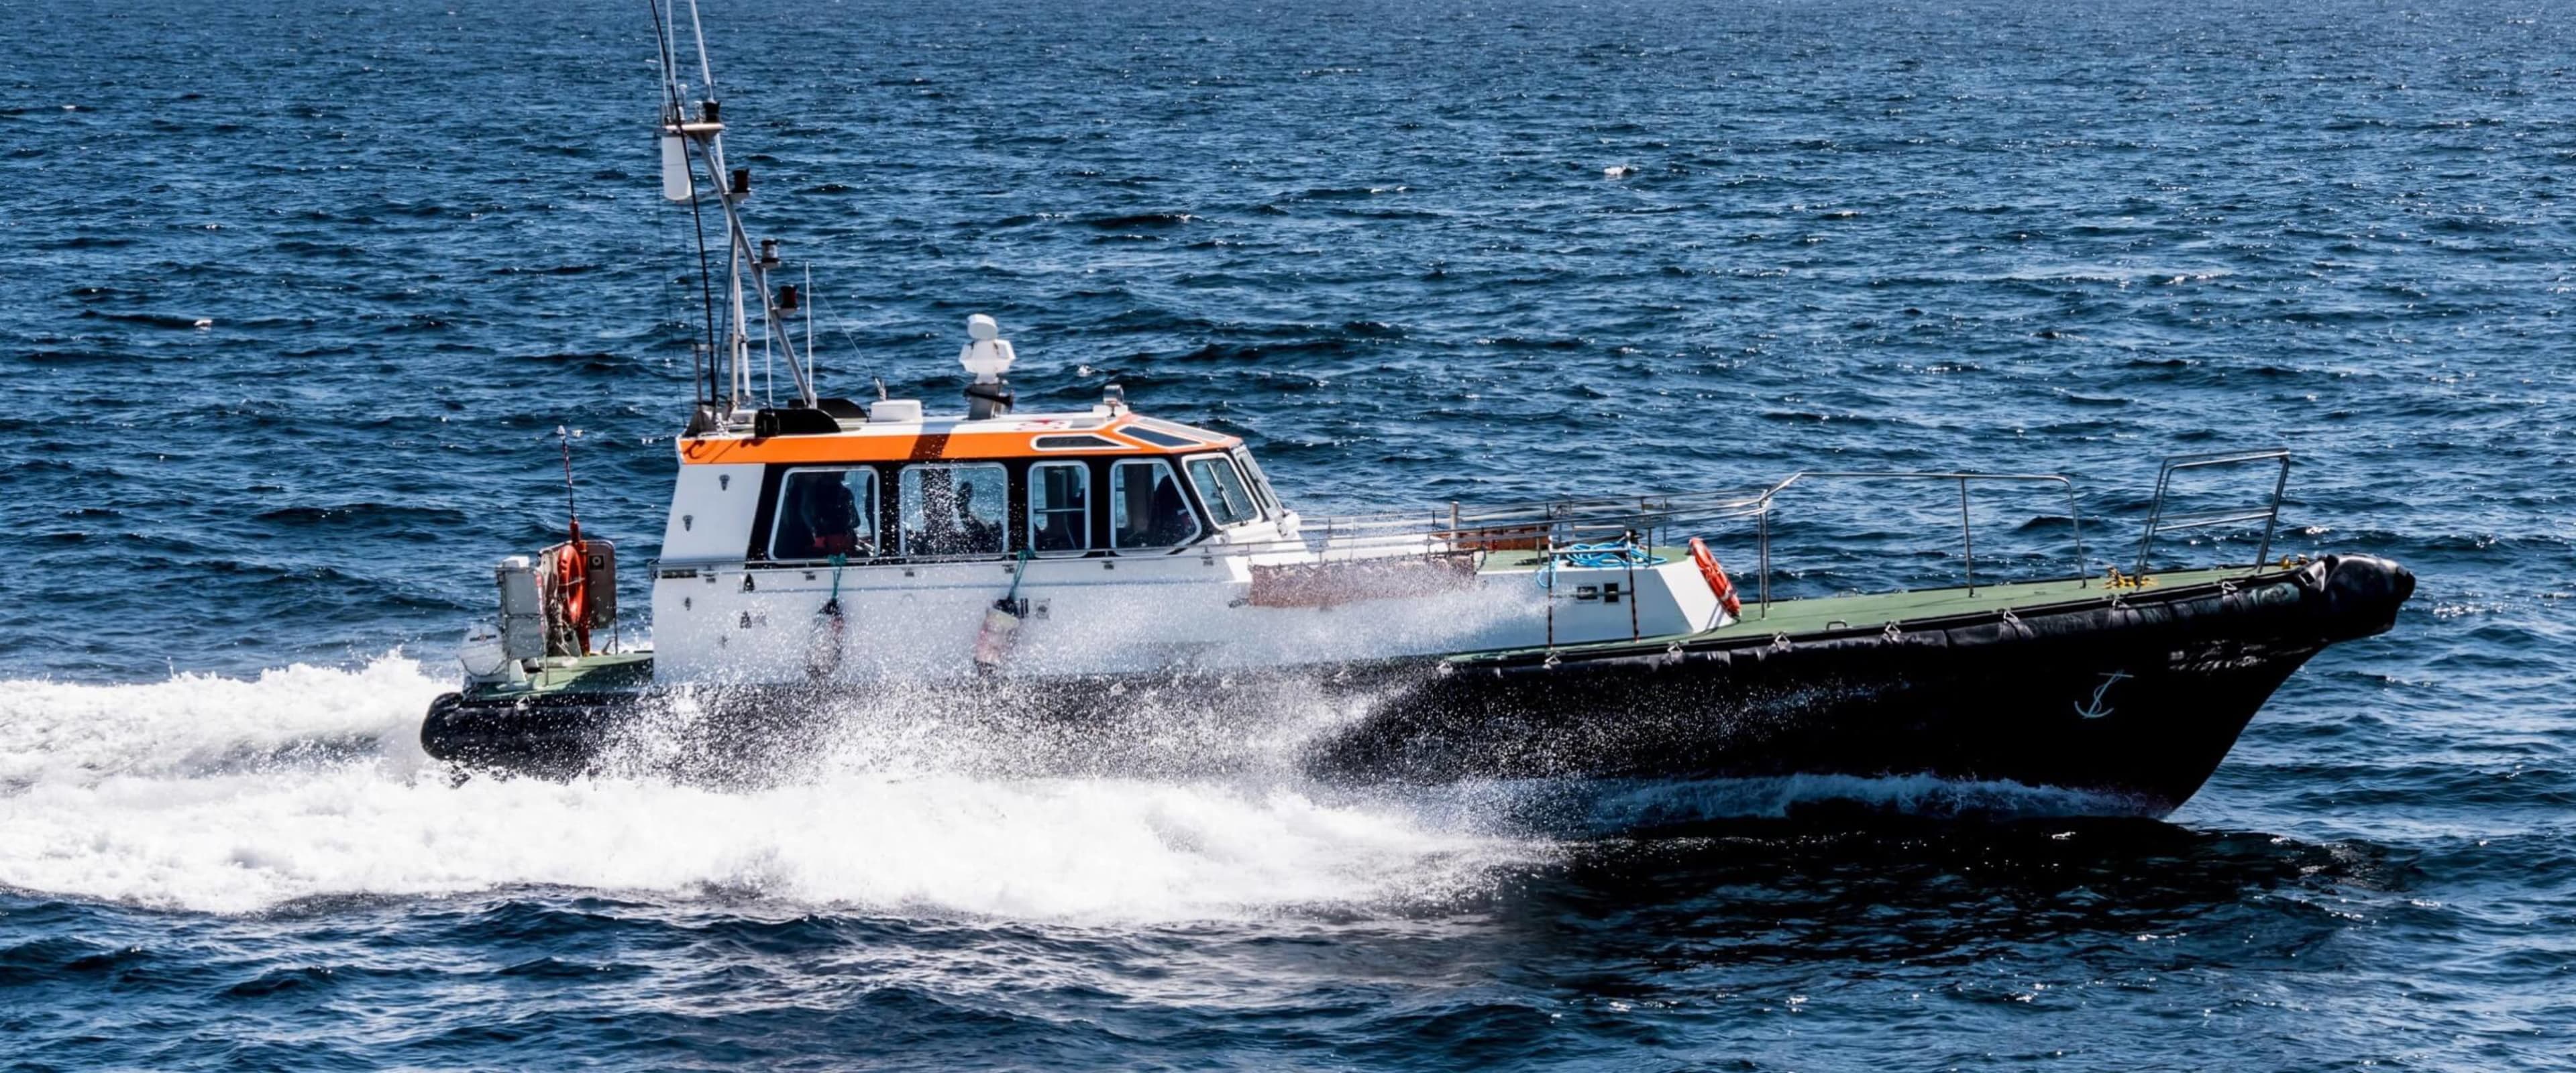 Pilot Boats for Sale are available right now - Damen